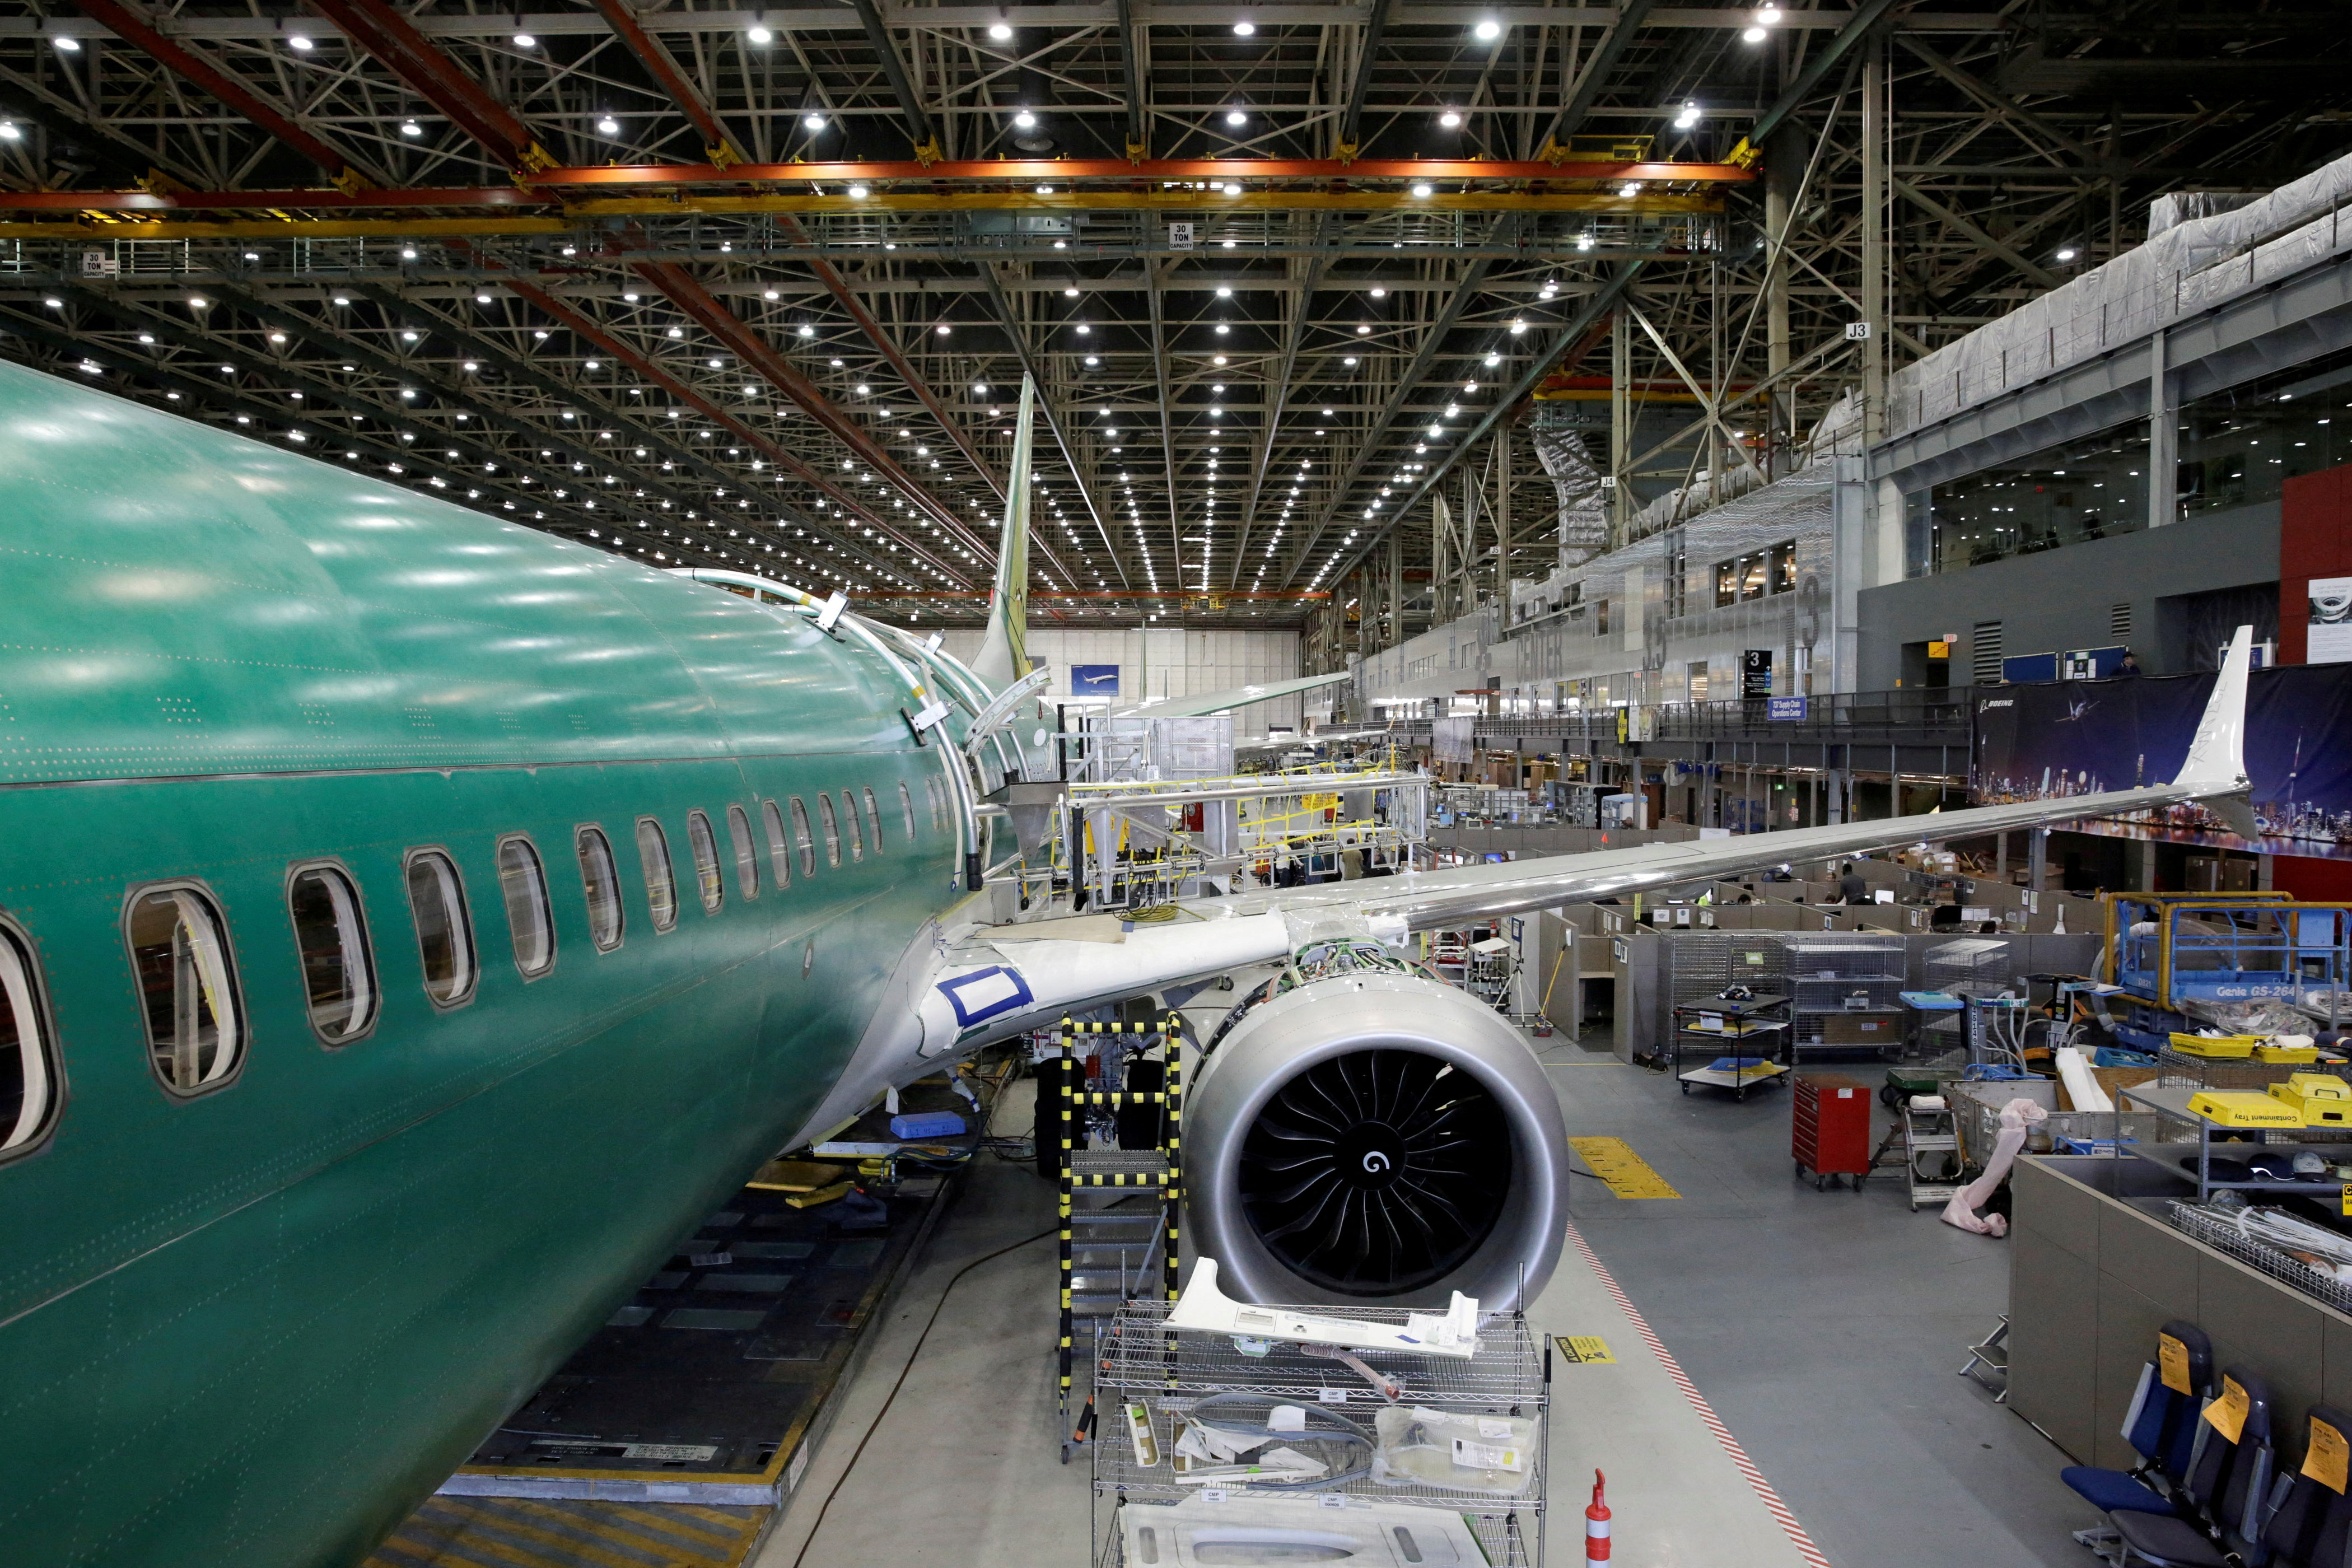 Boeing's new 737 MAX-9 is pictured under construction at their production facility in Renton, Washington